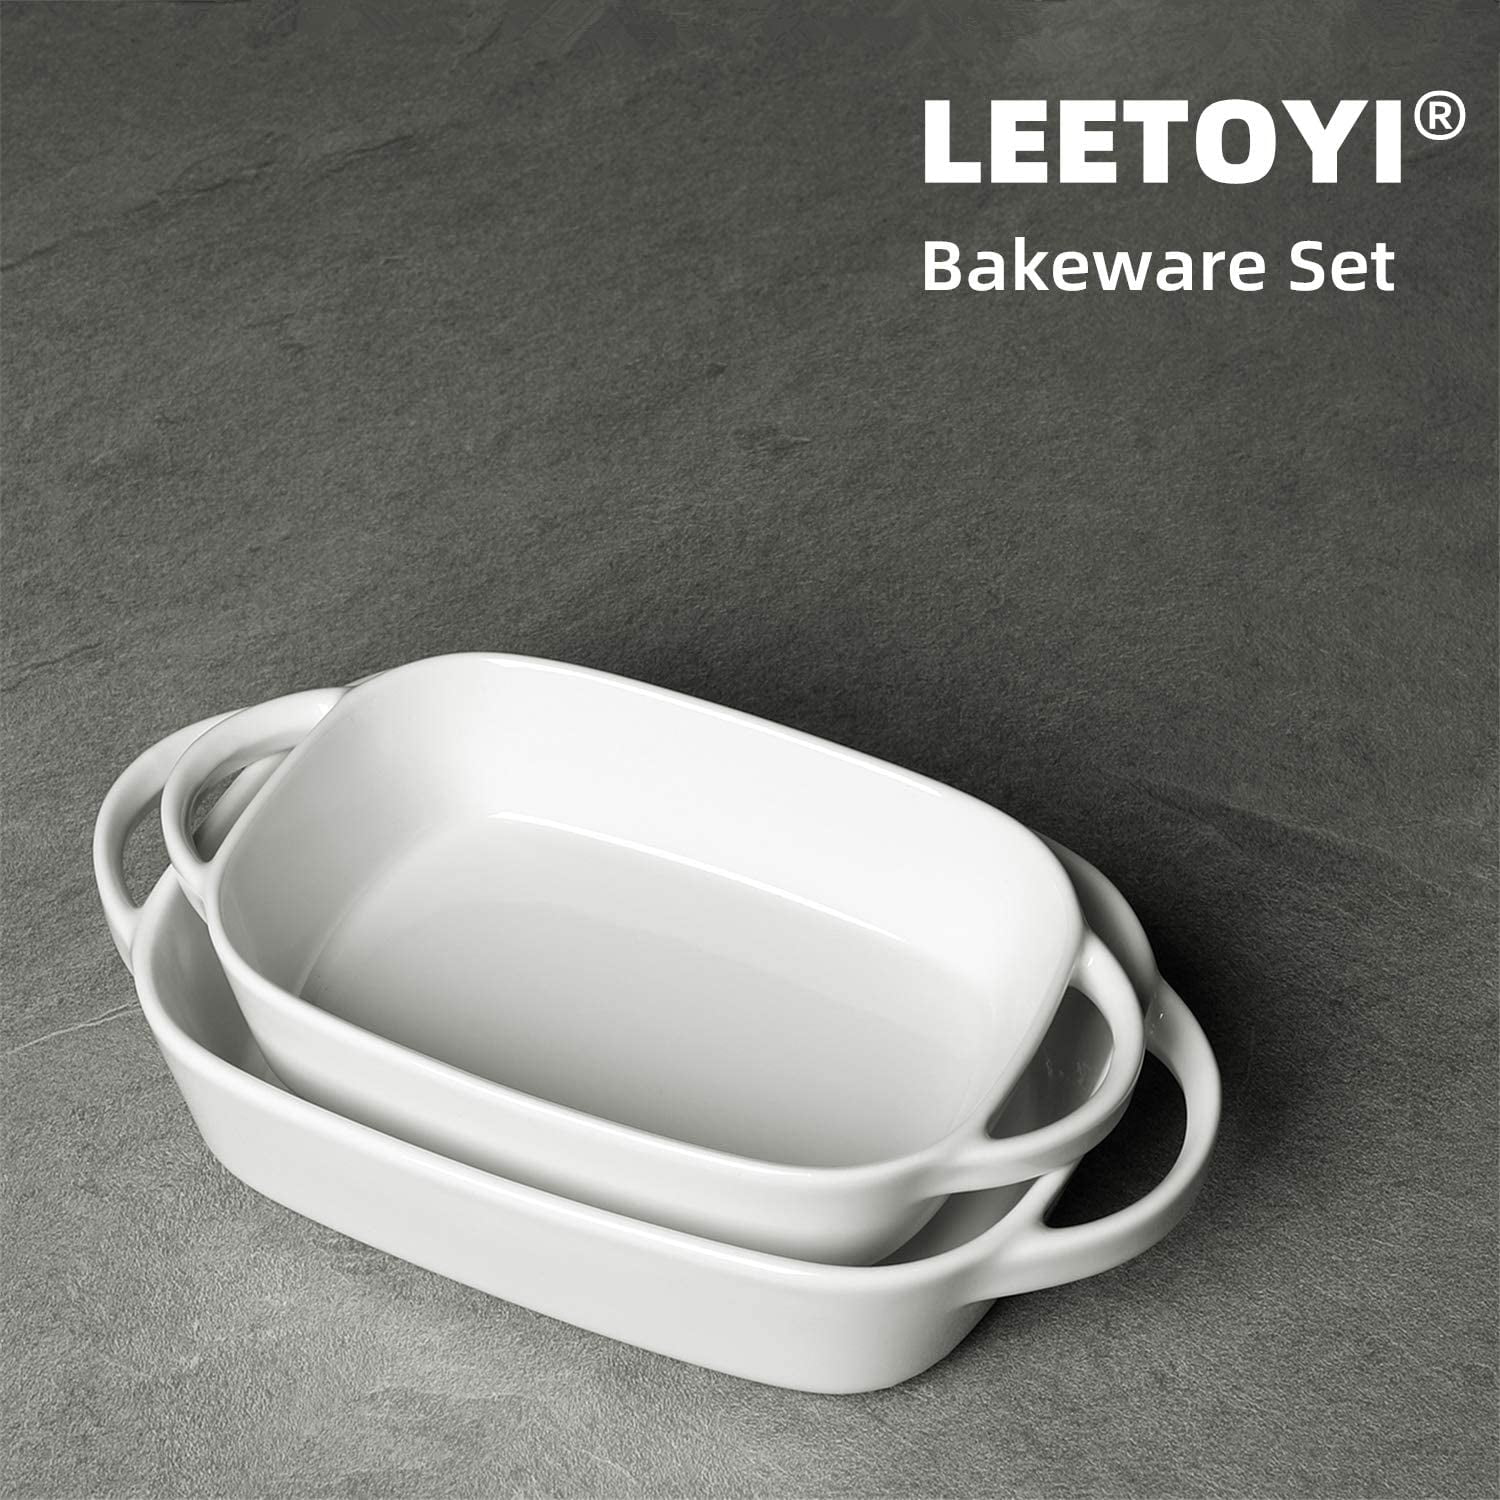 LEETOYI Porcelain Bakeware Set 2 Size Rectangular Baking Dish with Double Handle,Ceramics Baking Pans for Kitchen Cake Dinner,1 or 2 person servings 10.5-Inch/9-Inch White Cooking 